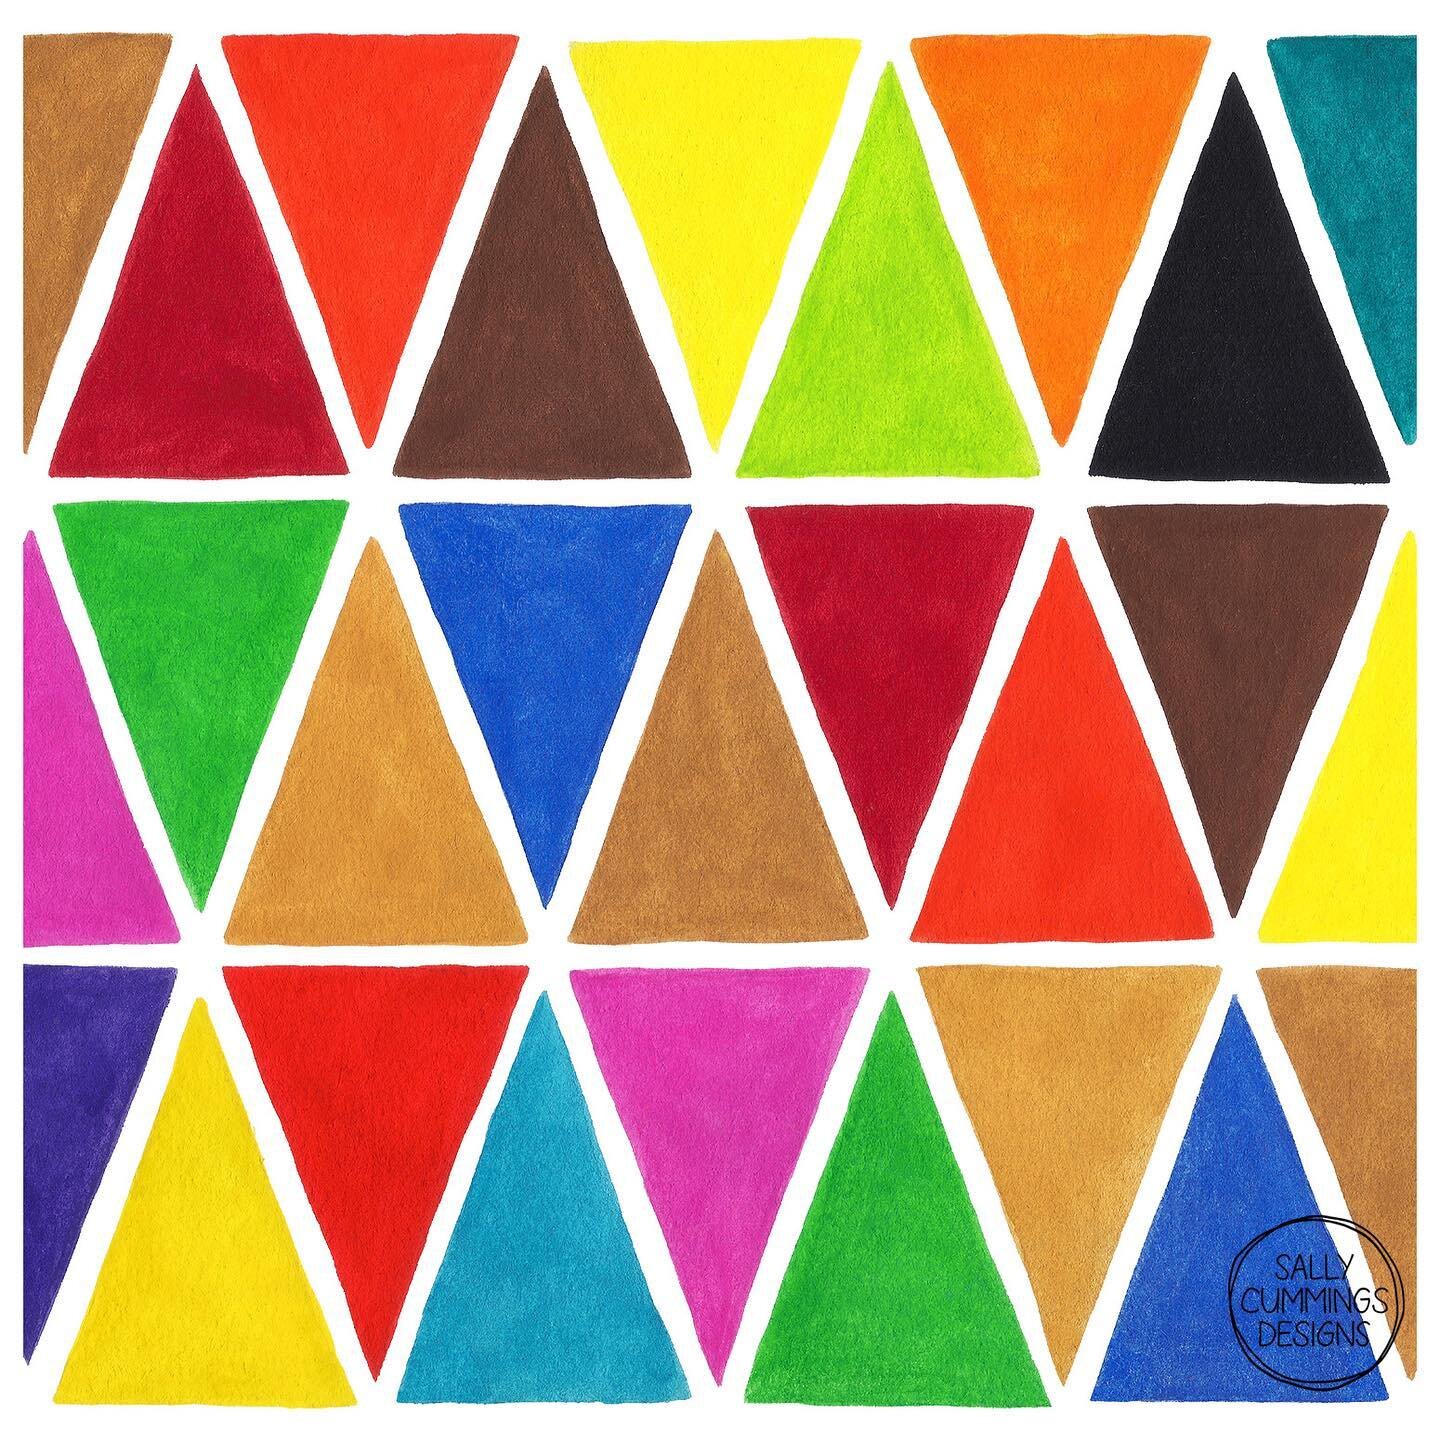 Multicoloured Harlequin Triangles is one of my most joyfully colourful designs to date! 😊 Hand painted triangles in saturated watercolours. Available on Society6 and Redbubble 🌈

#sallycummingsdesigns #society6 #redbubble #patterndesign #surfacedes